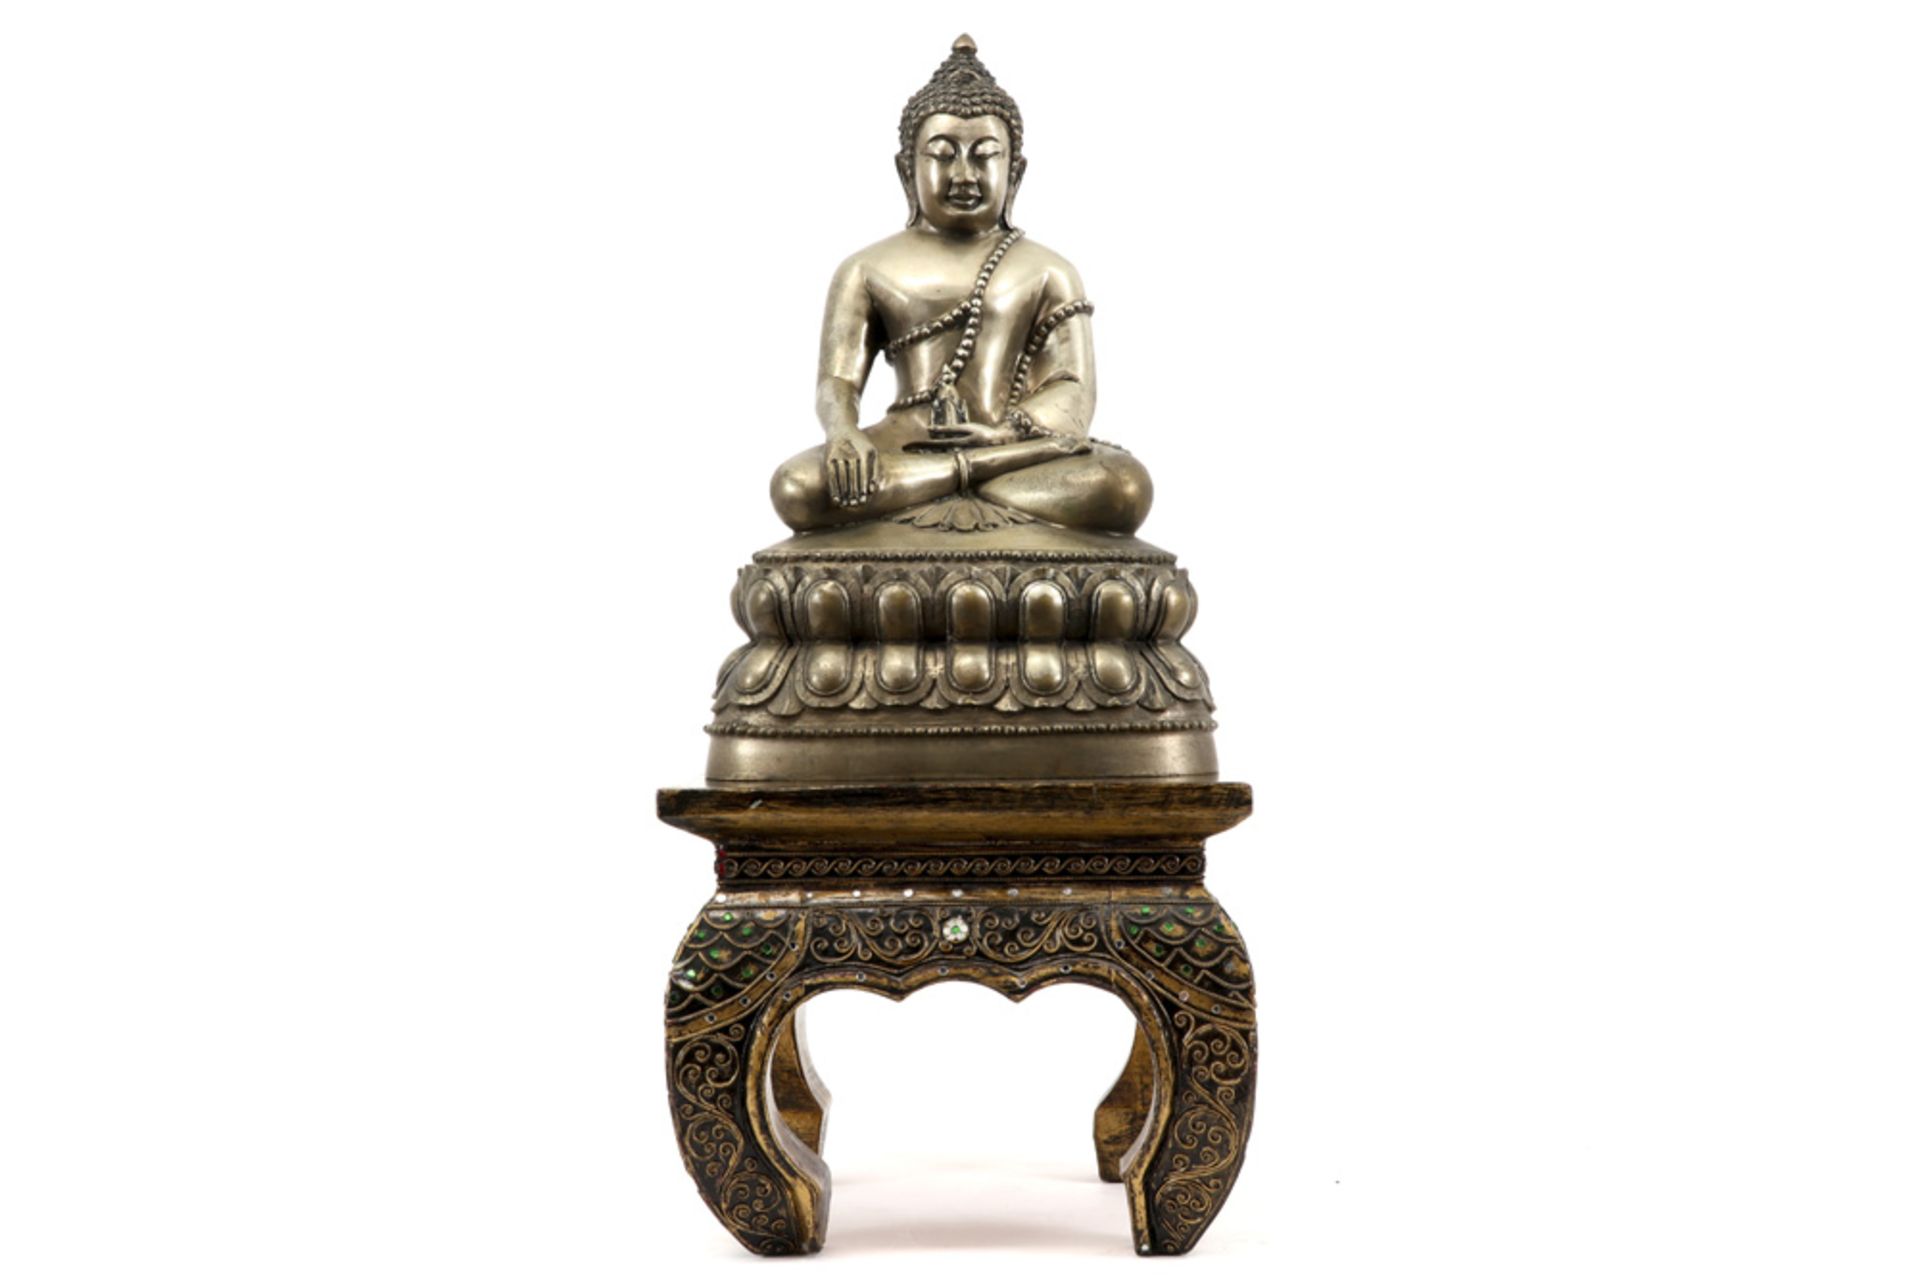 Burmese Shan style "Buddha" sculpture in silverplated bronze - on a gilded stand ||Birmaanse